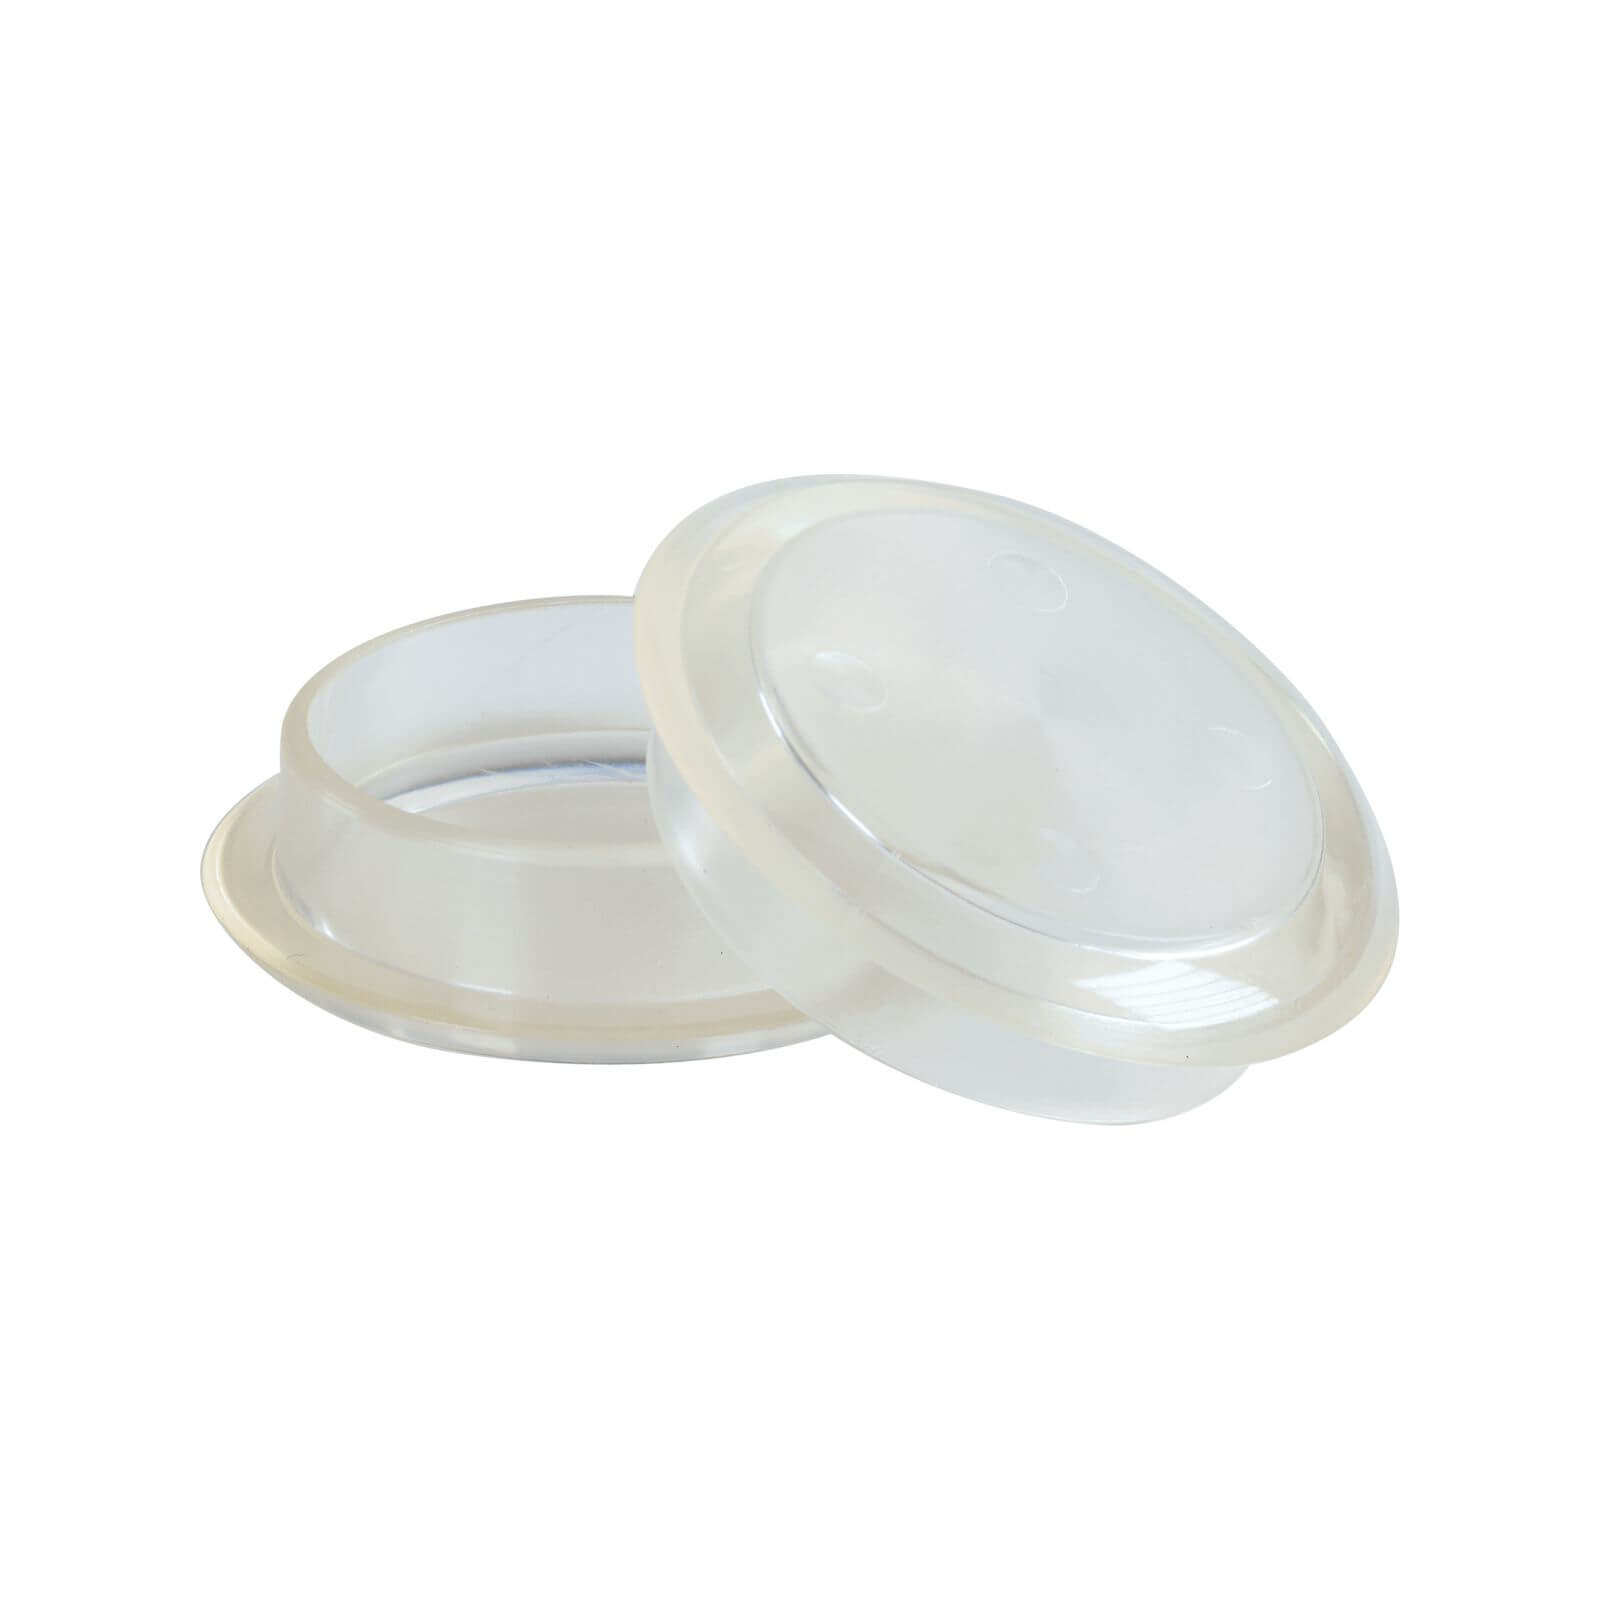 Clear Castor Cups - 4 Pack